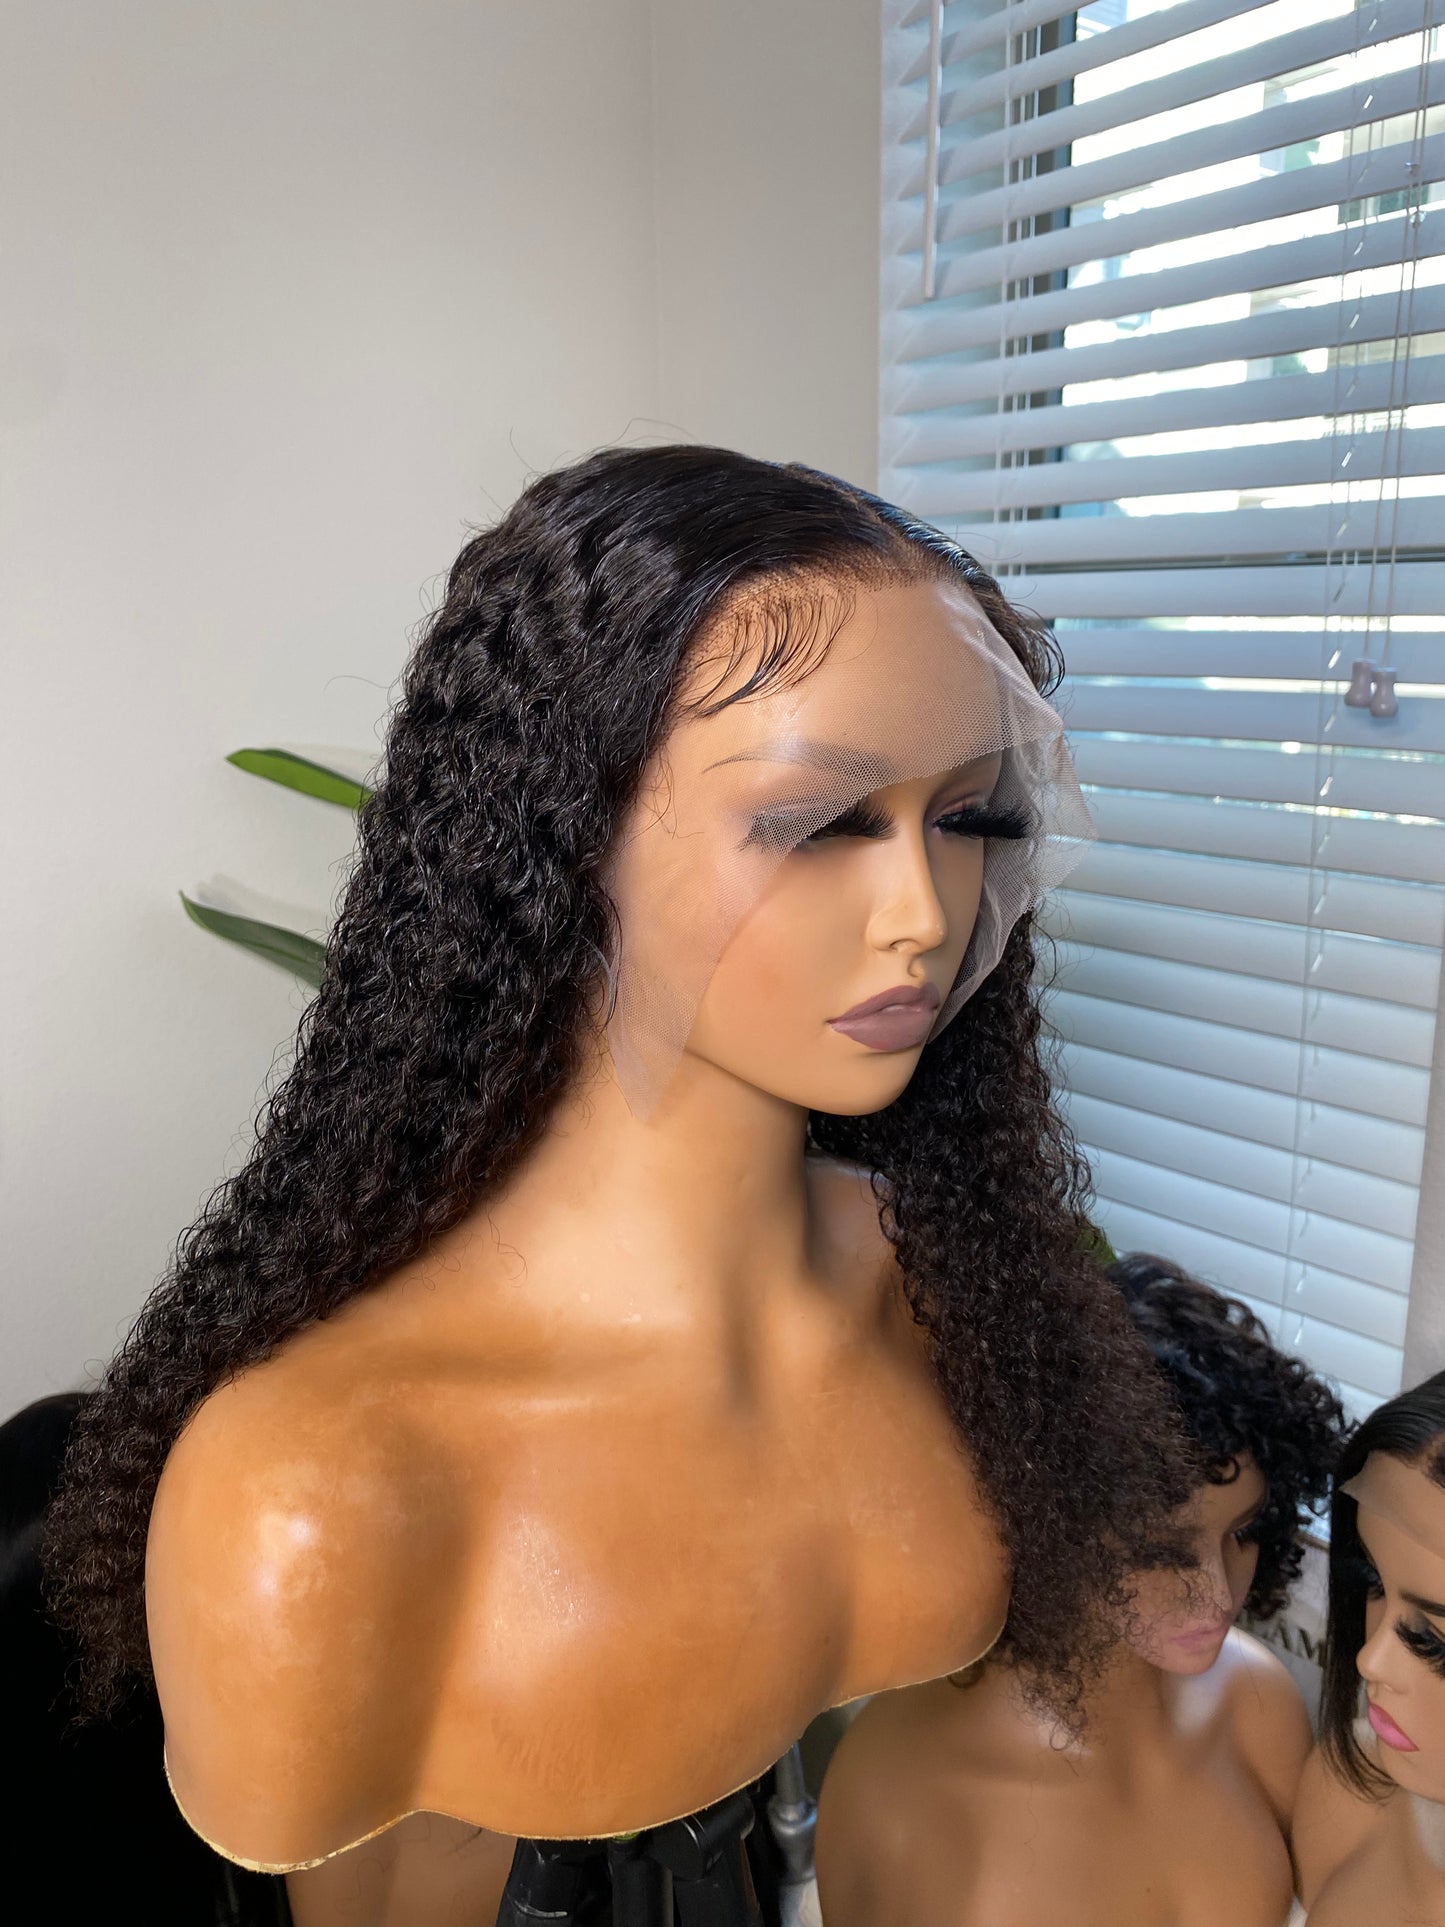 “Harlem” Kinky curly lace frontal wig